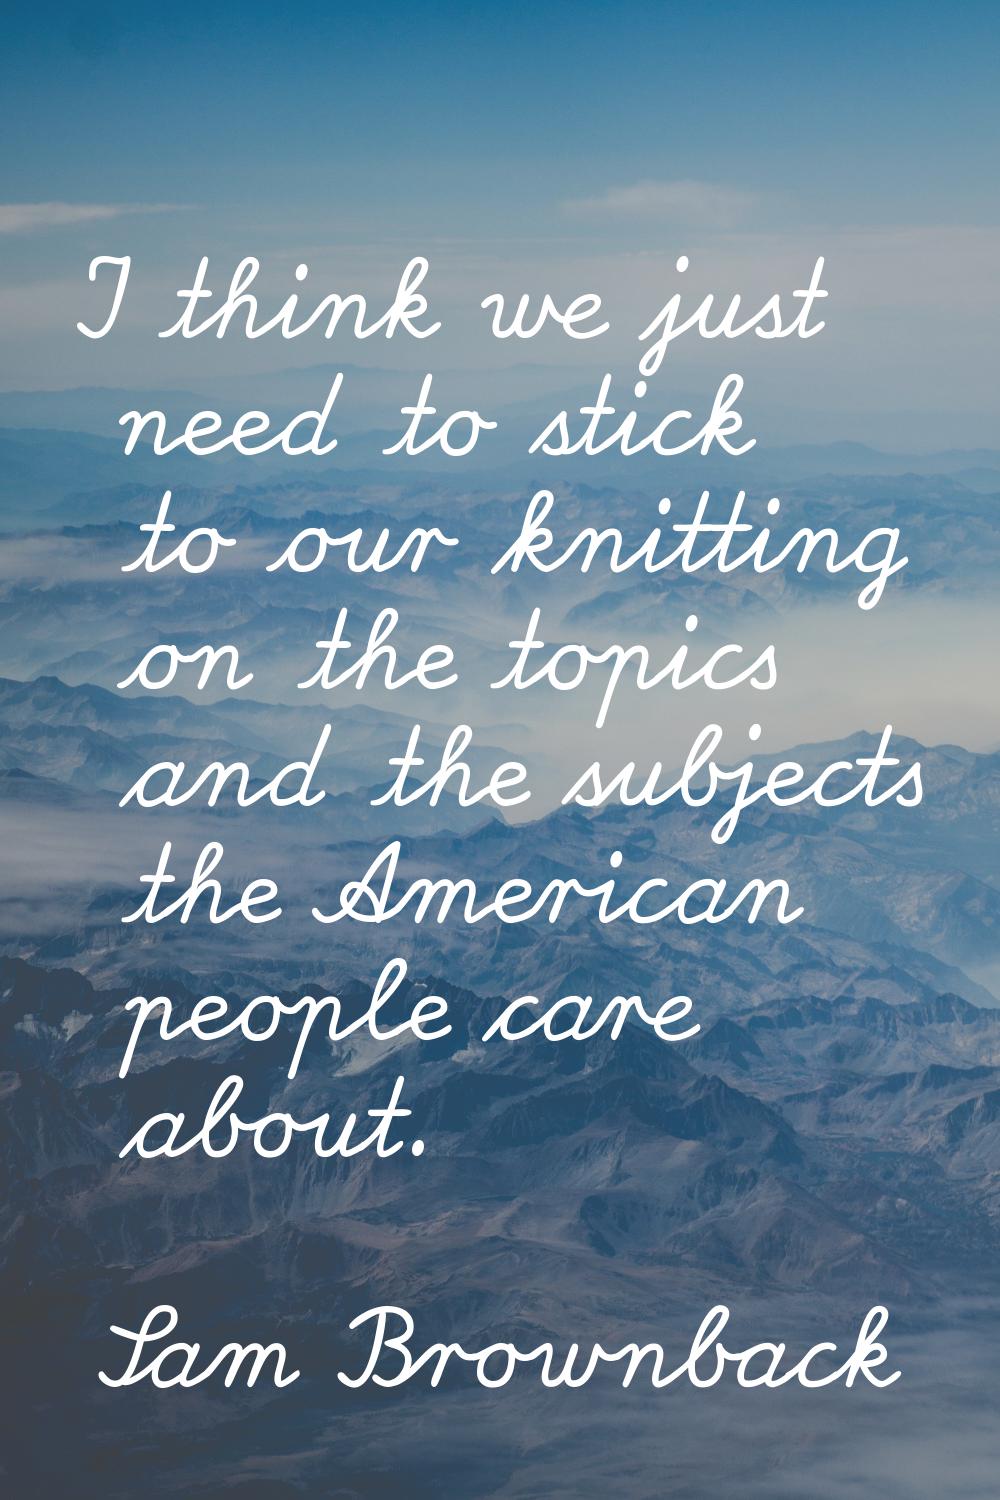 I think we just need to stick to our knitting on the topics and the subjects the American people ca